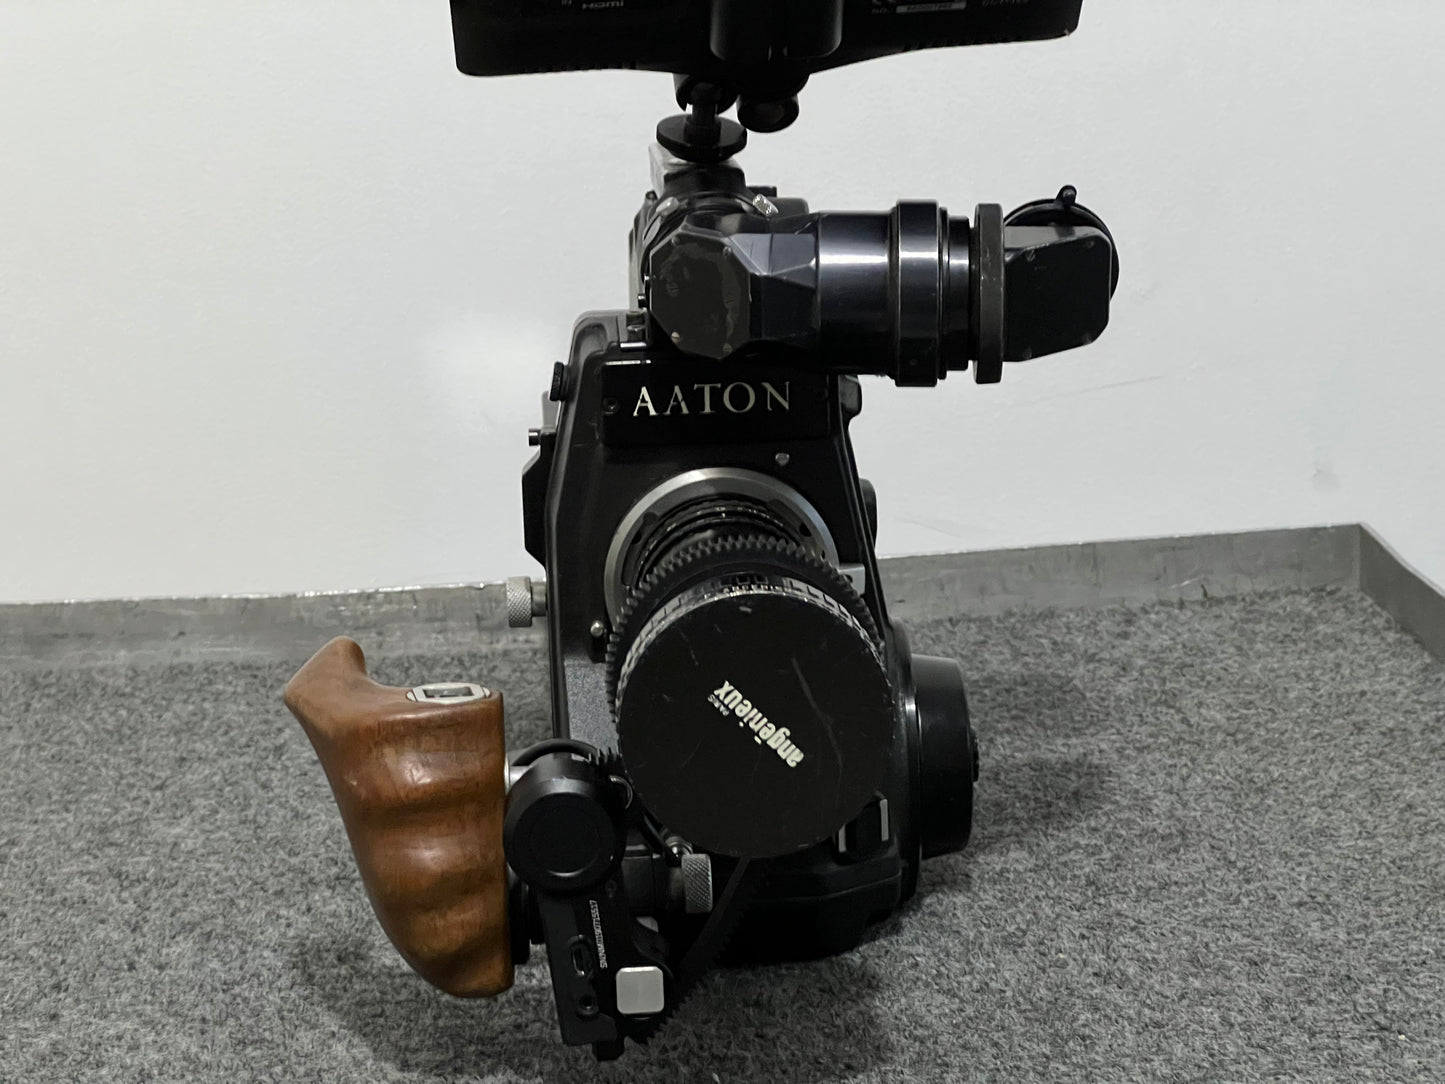 Aaton LTR 32 16mm movie camera with lens